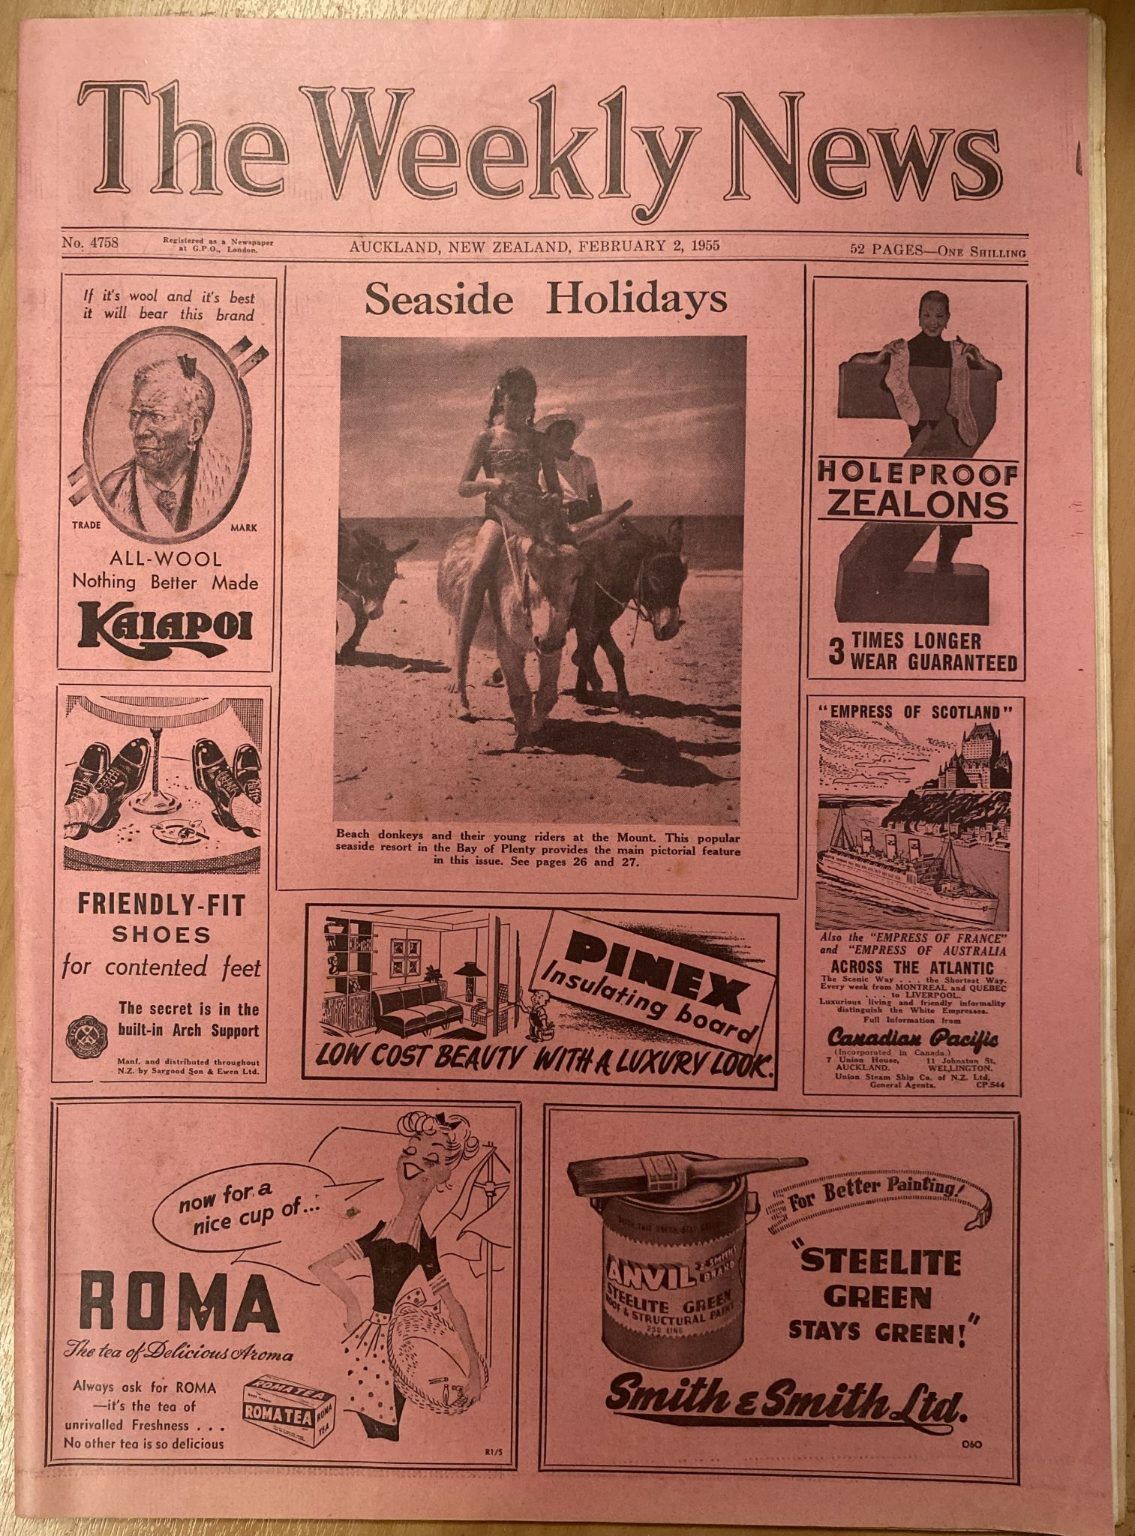 OLD NEWSPAPER: The Weekly News - No. 4758, 2 February 1955